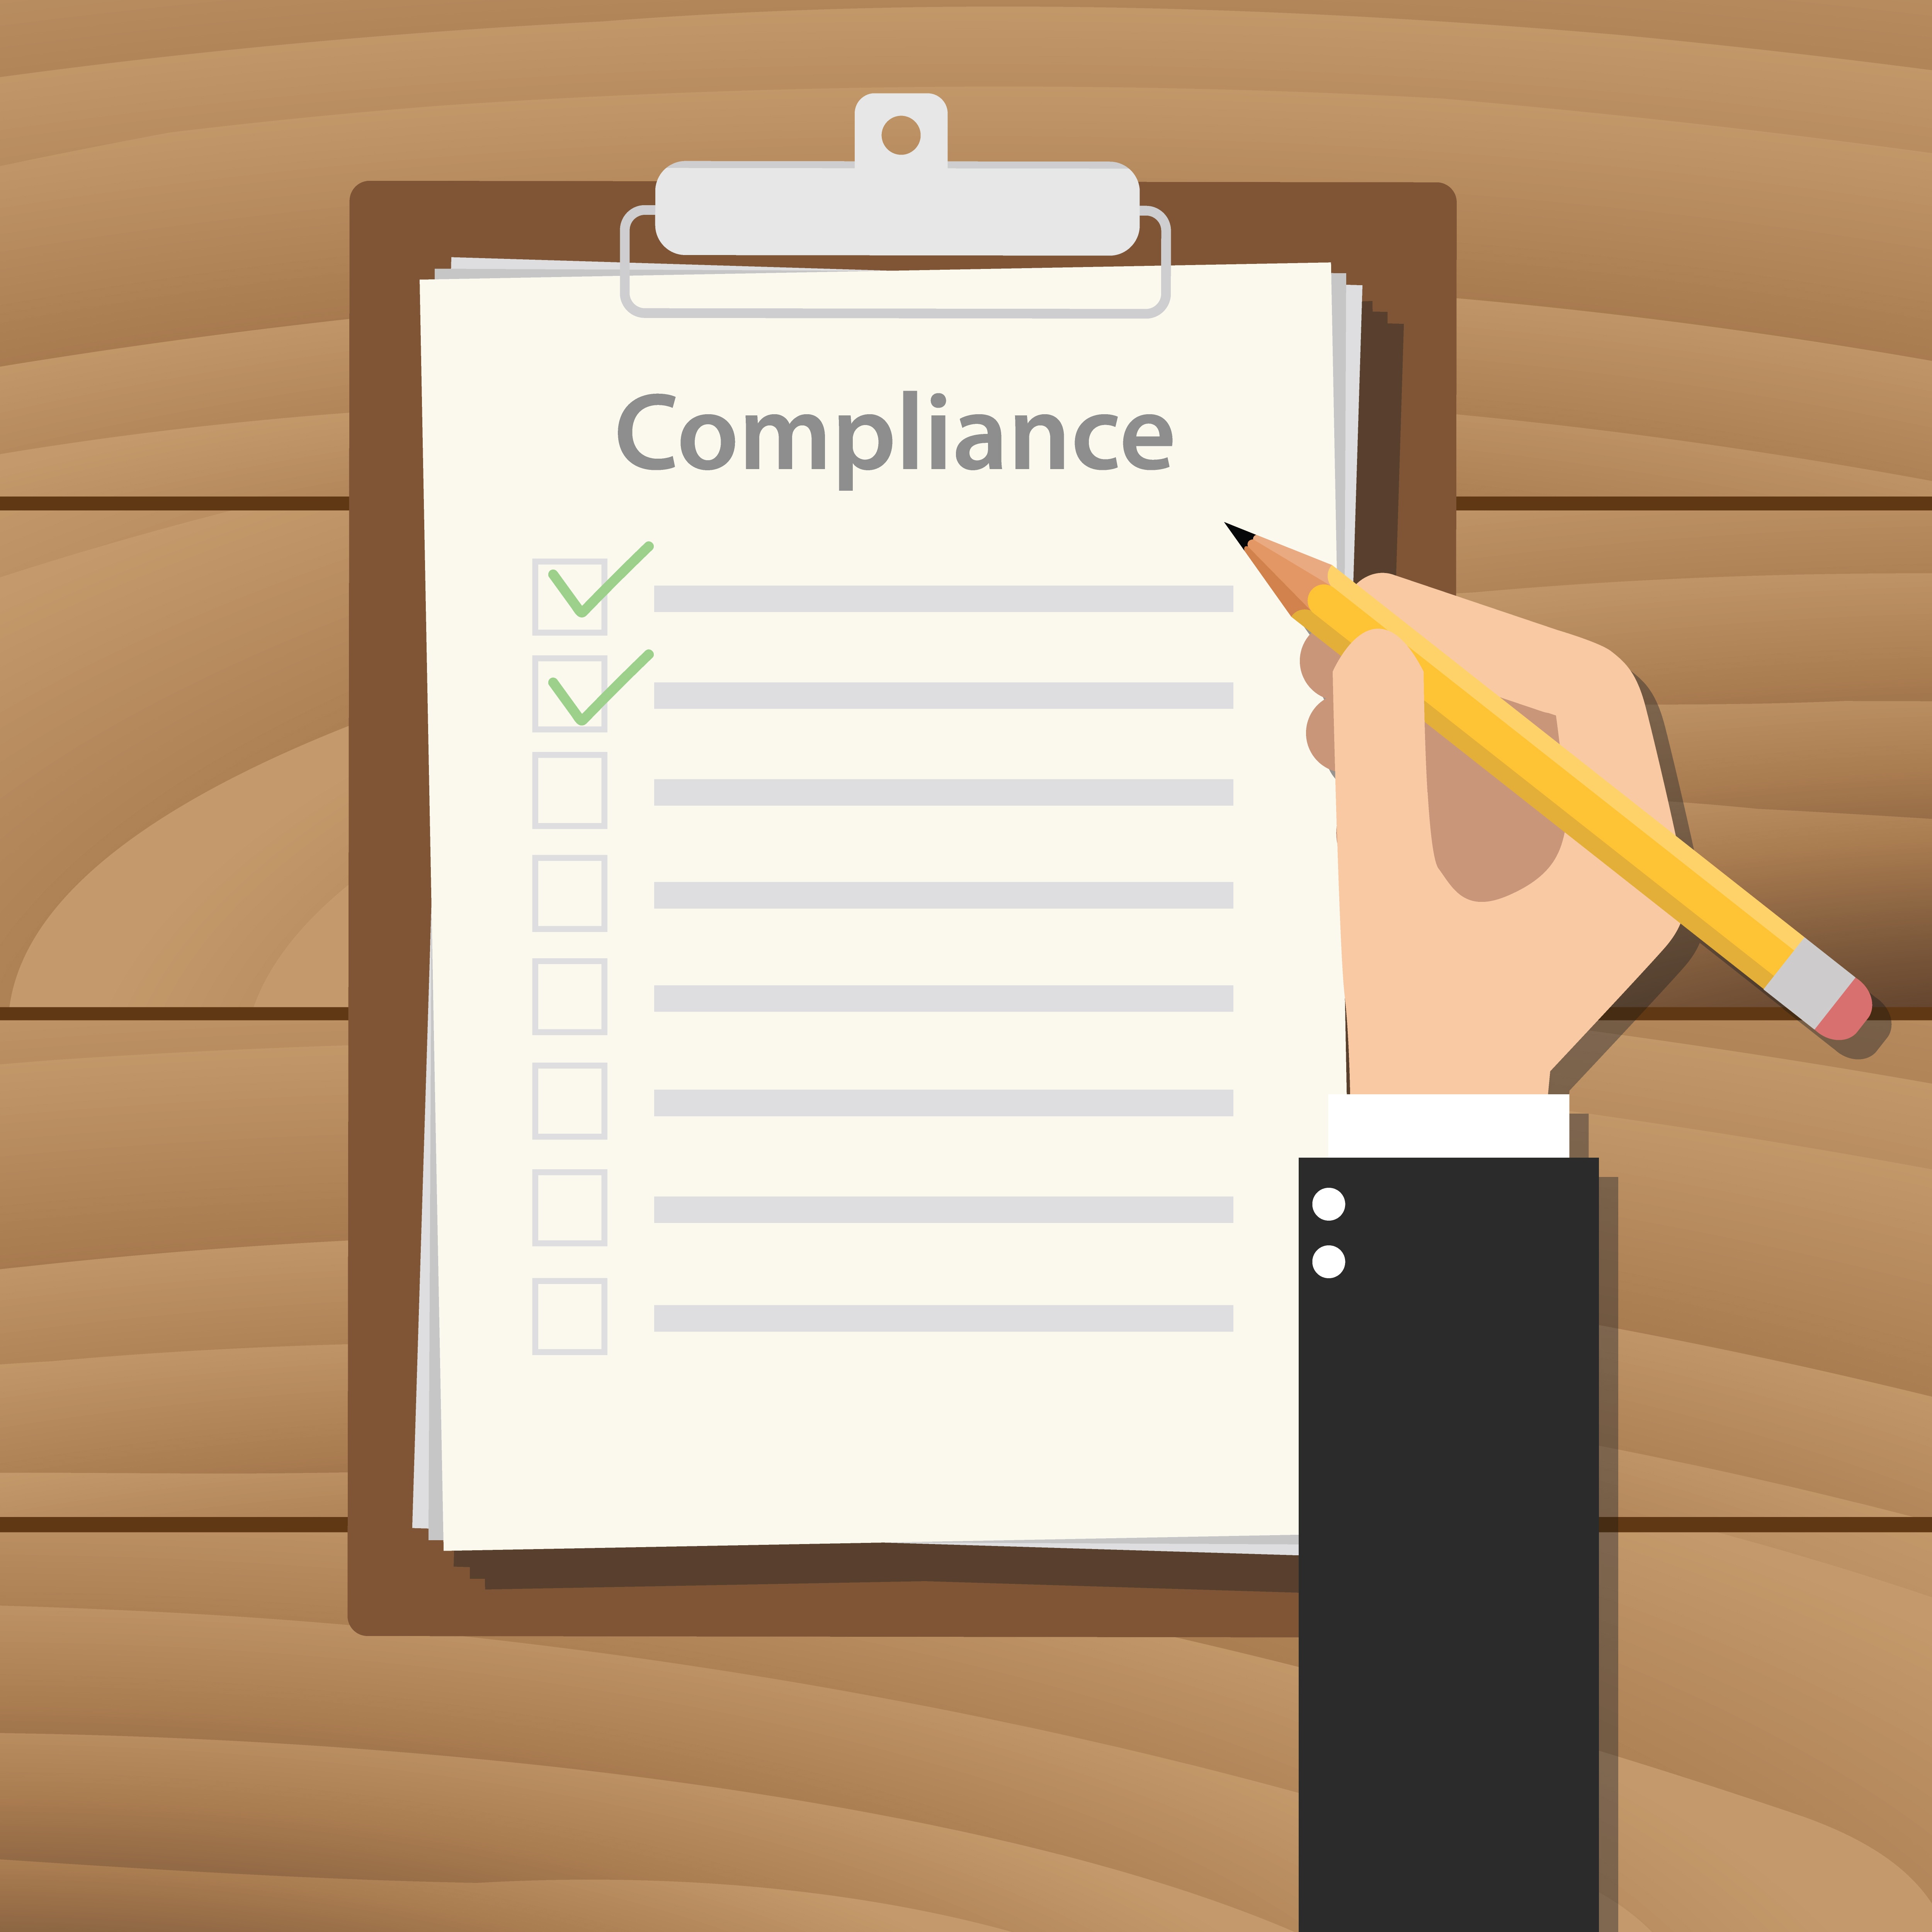 PCI DSS Compliance Checklist – Get Ready for 2019